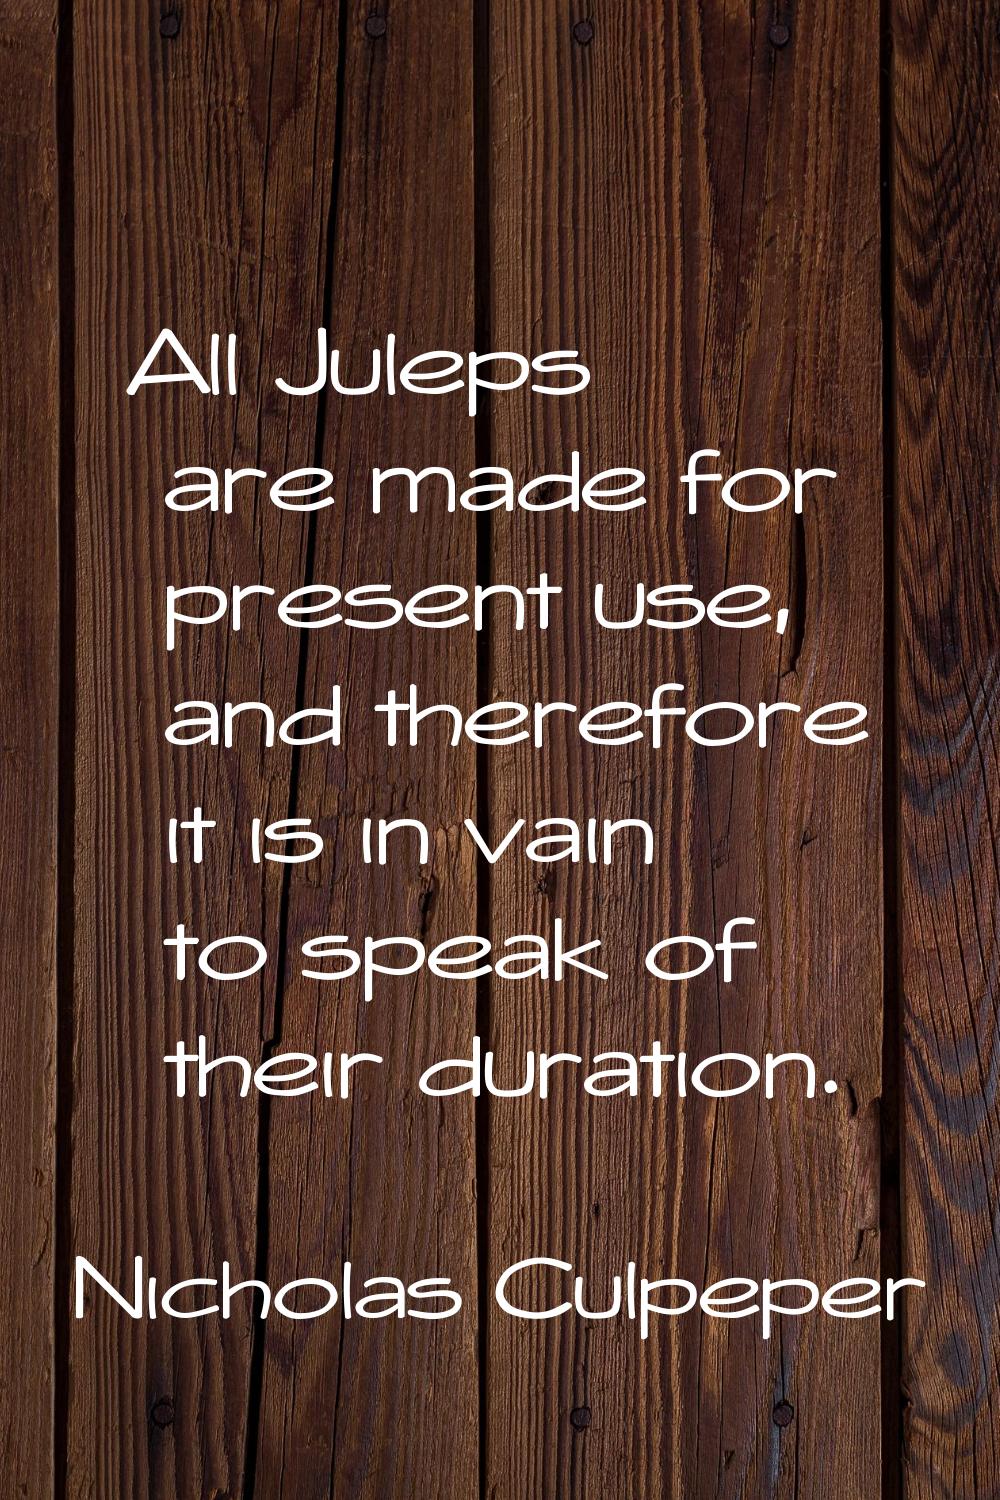 All Juleps are made for present use, and therefore it is in vain to speak of their duration.